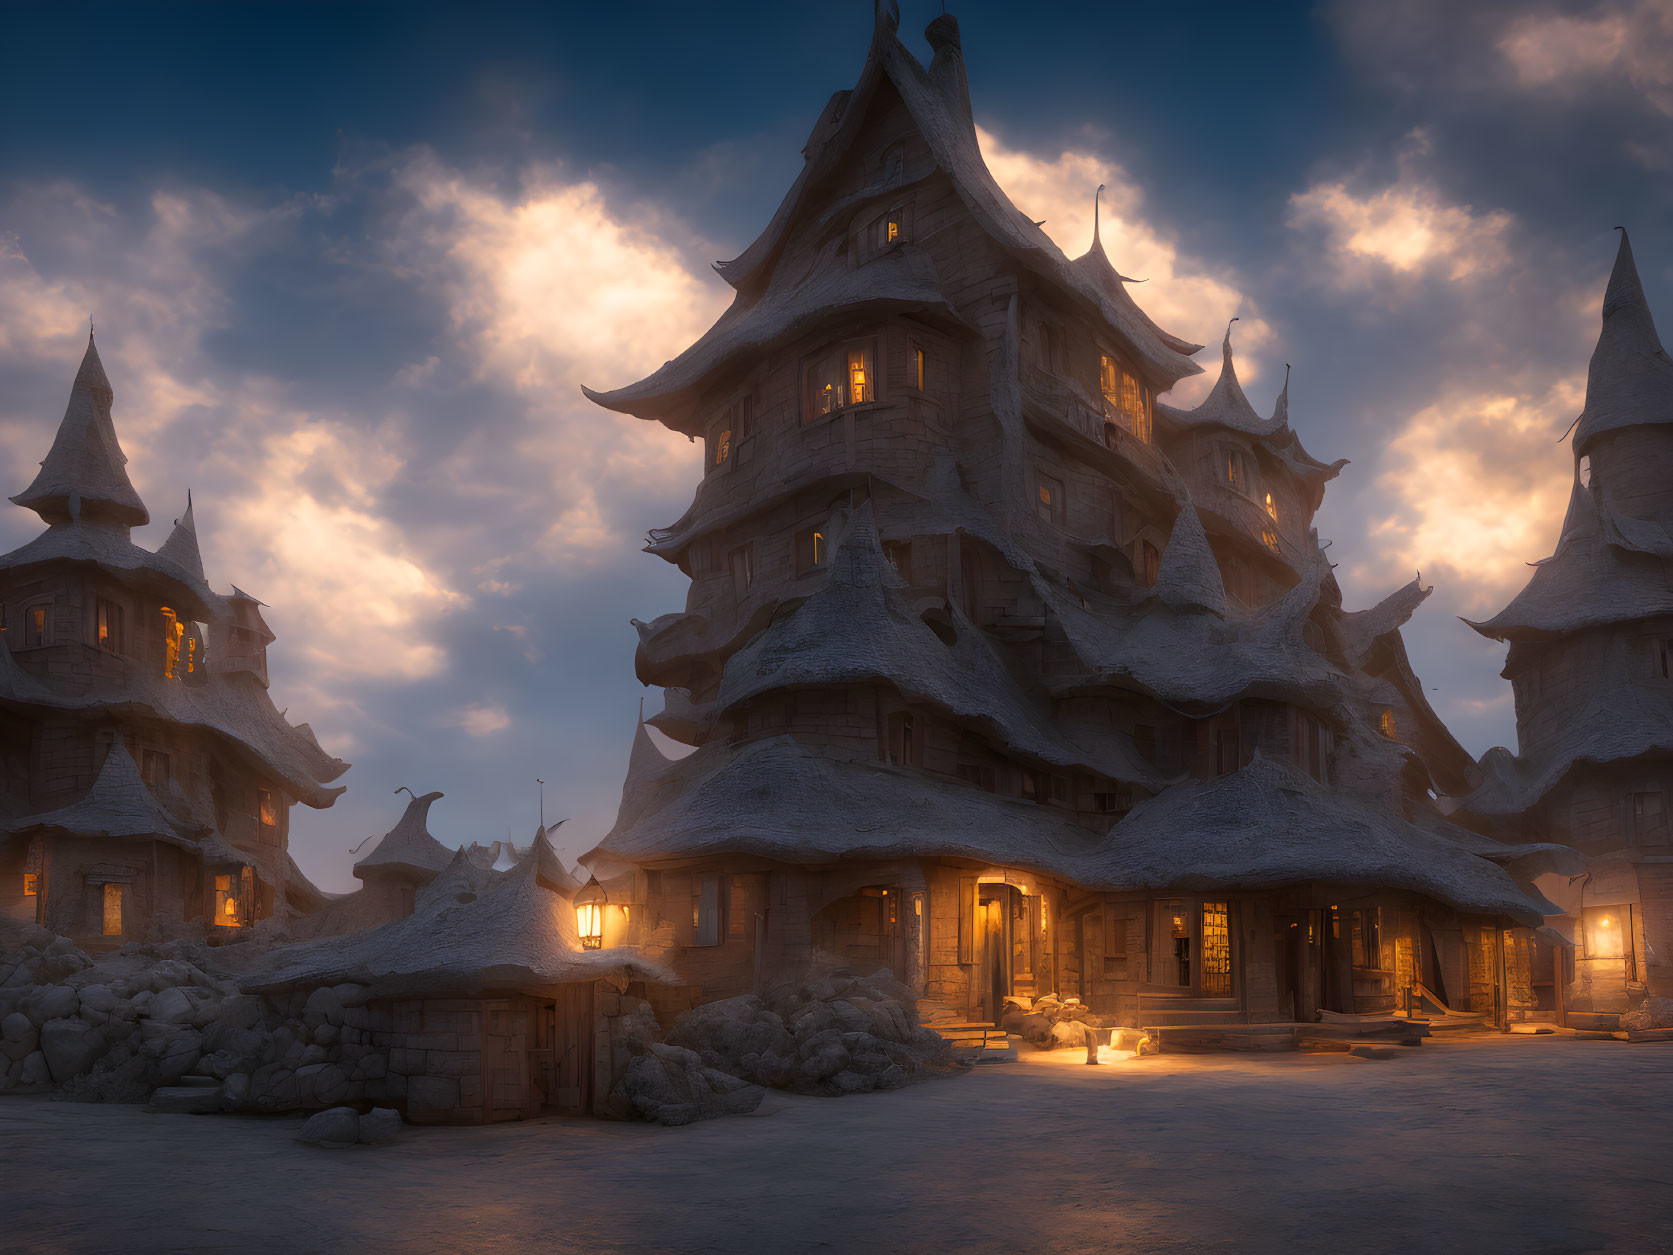 Whimsical snow-covered fantasy village at twilight